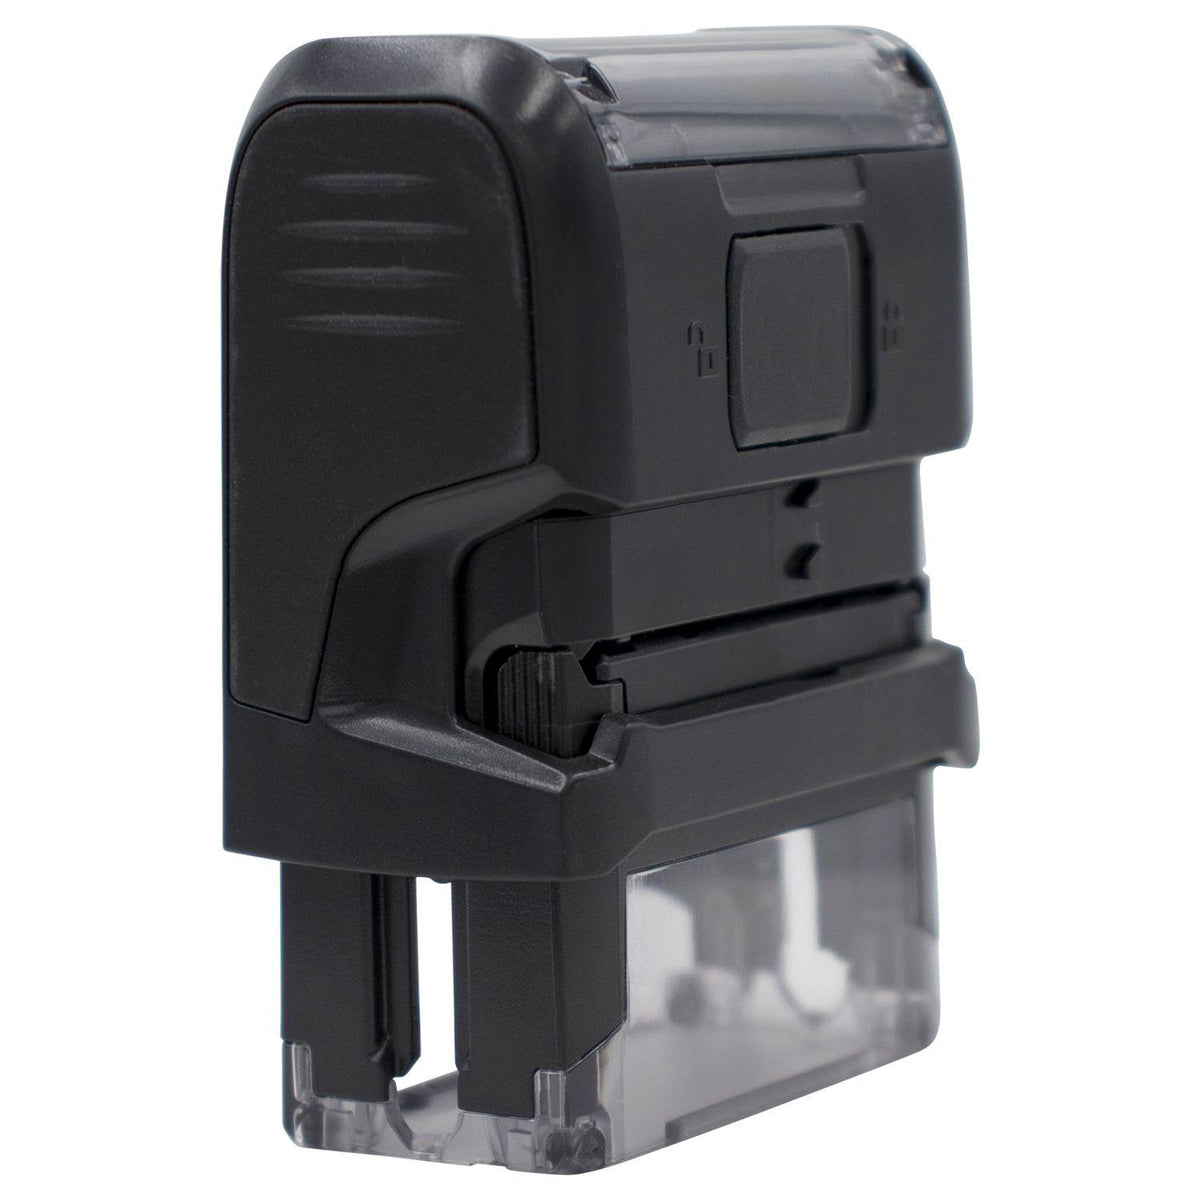 Large Self-Inking Contact Tracing Stamp Back View